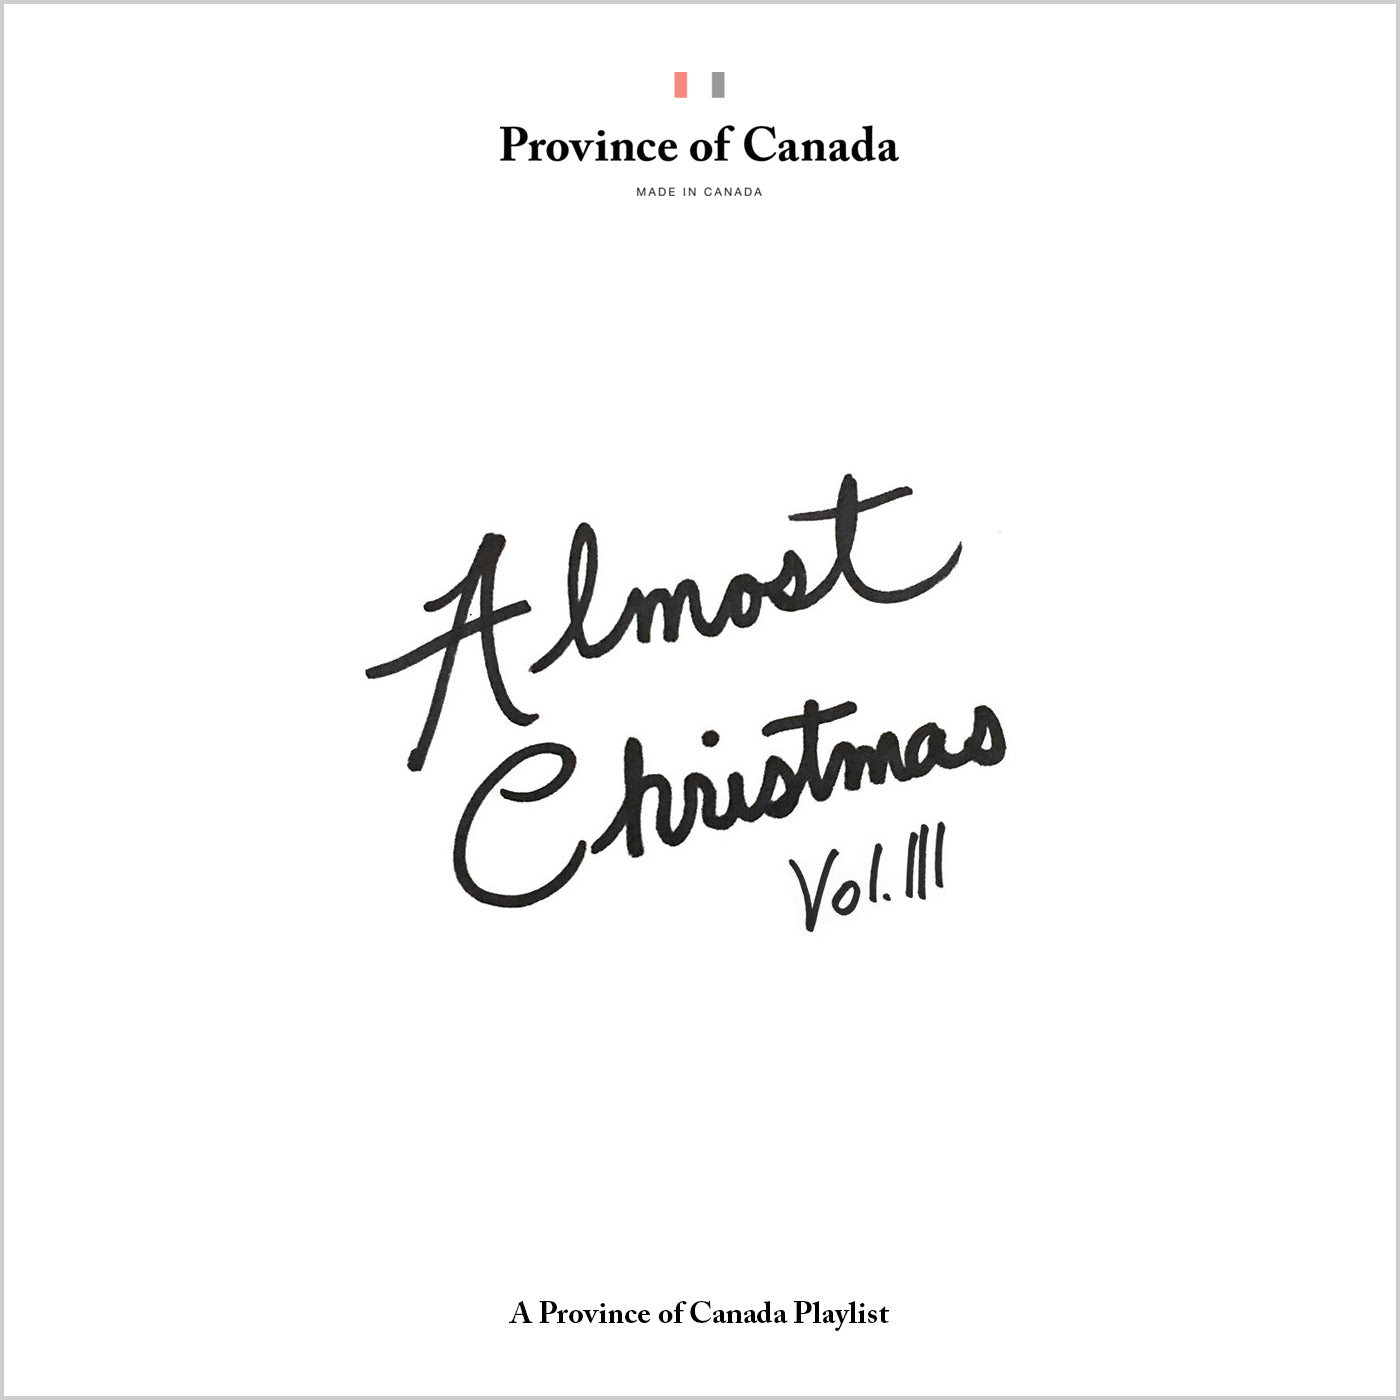 Province of Canada - Made in Canada - Playlist - Almost Christmas Vol. III